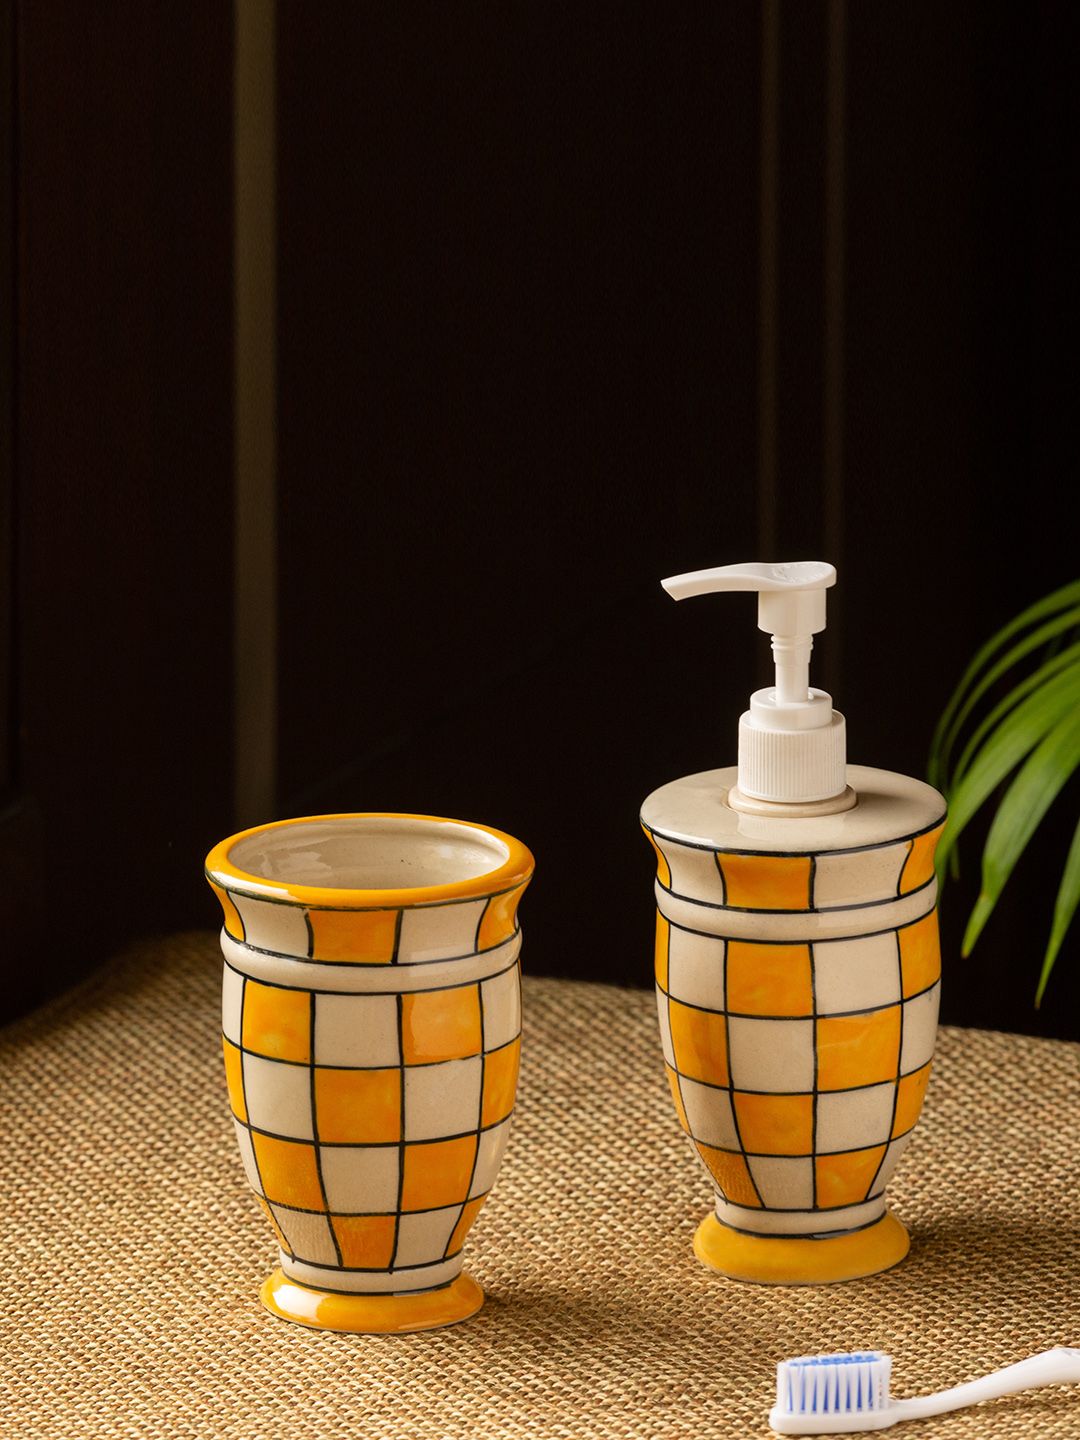 ExclusiveLane Set Of 2 Yellow & White Hand-Painted Ceramic Bath Accessory Set Price in India